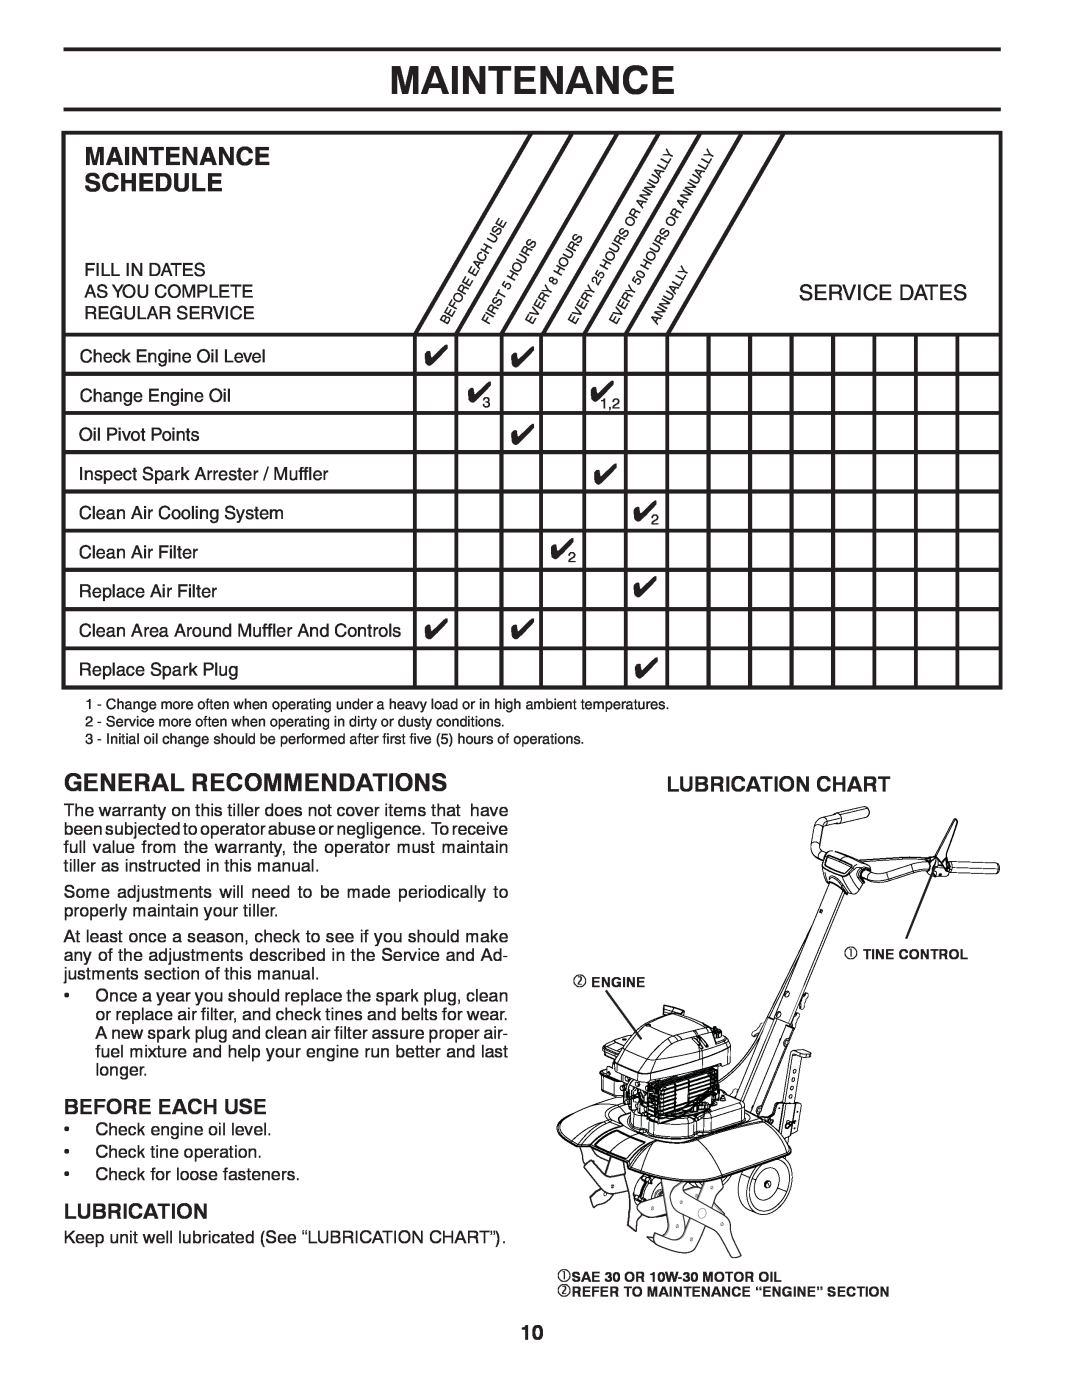 Poulan 96082001500, VF550, 433552 Maintenance Schedule, General Recommendations, Before Each Use, Lubrication Chart 